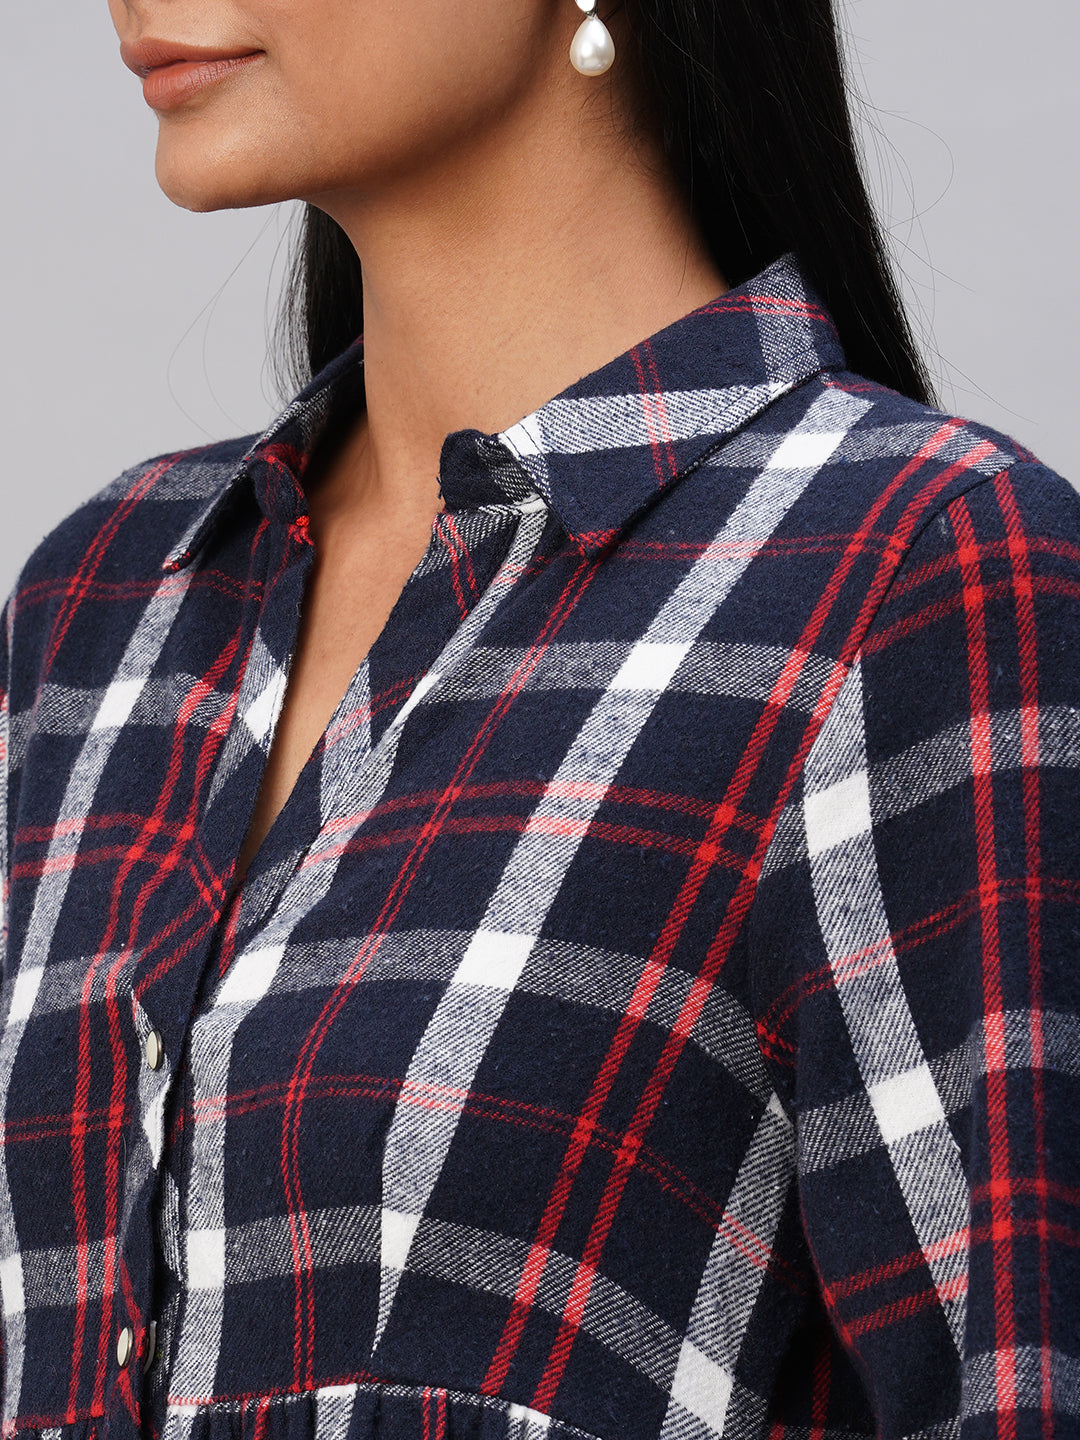 Brushed Flannel Waisted Shirt Dress